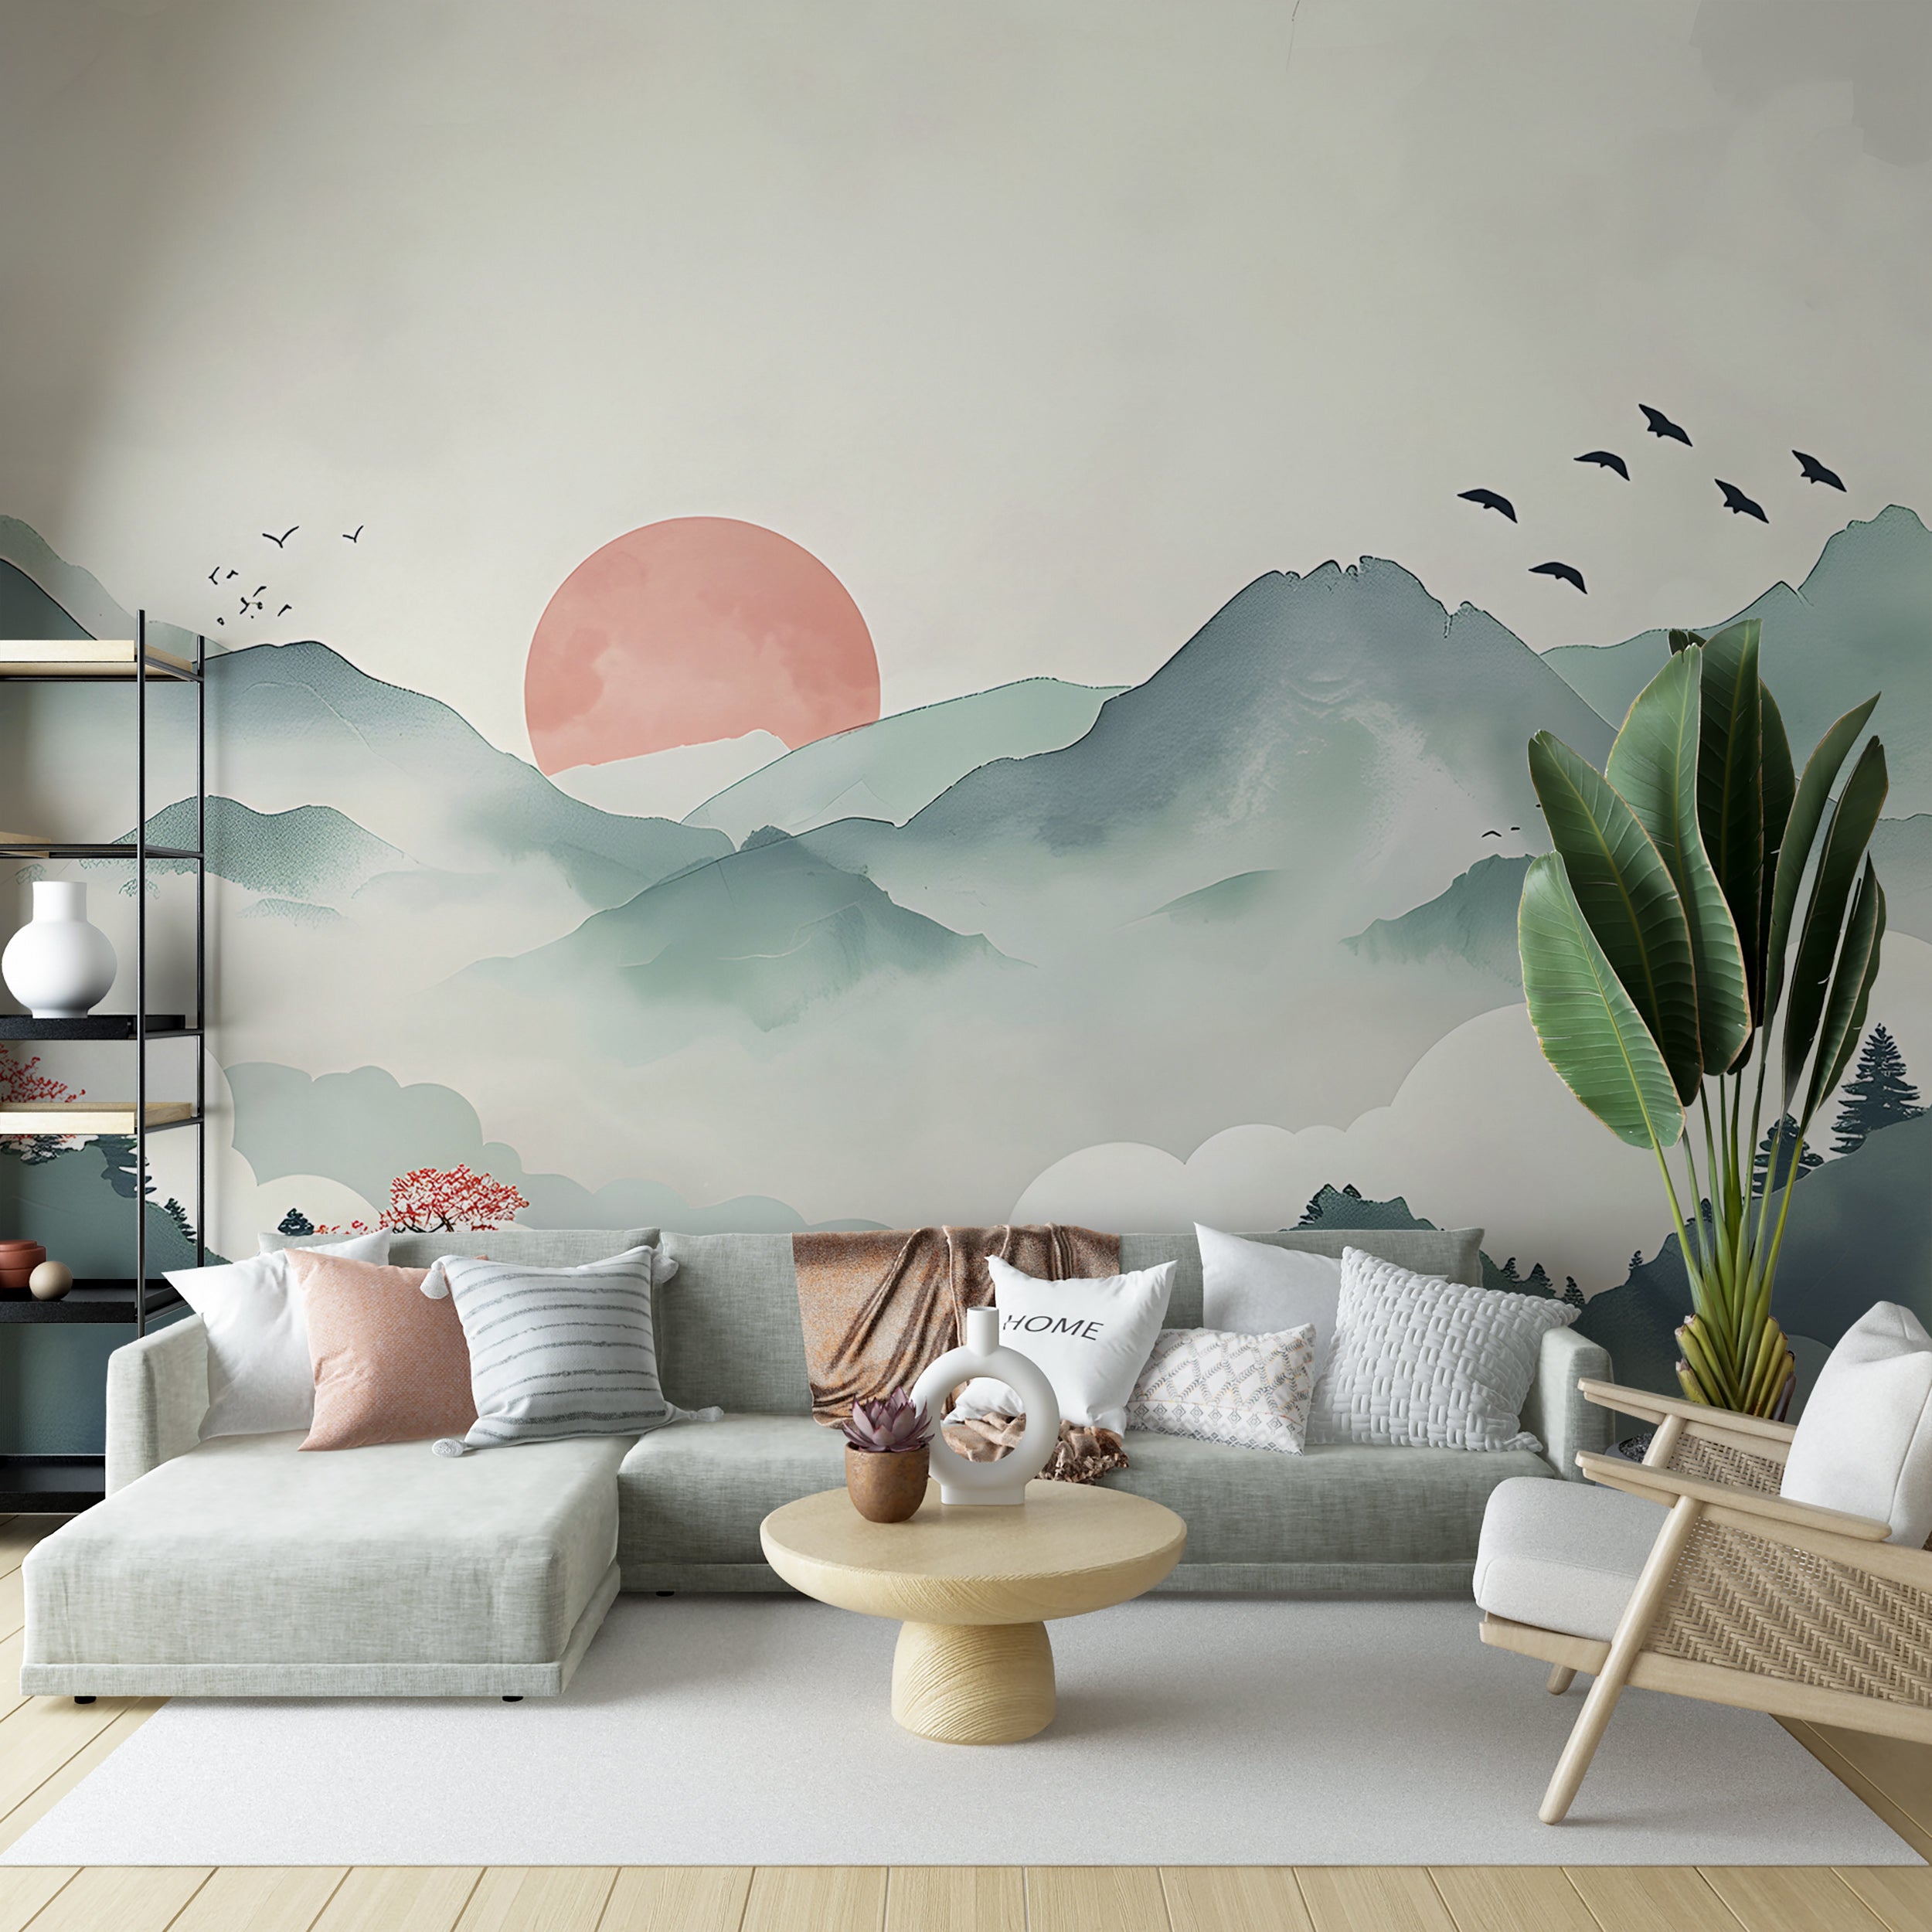 Red Sun Behind Green Mountains Mural, Watercolor Japanese Landscape Wallpaper, Peel and Stick Soft Colors Accent Wall Removable Wall Decal